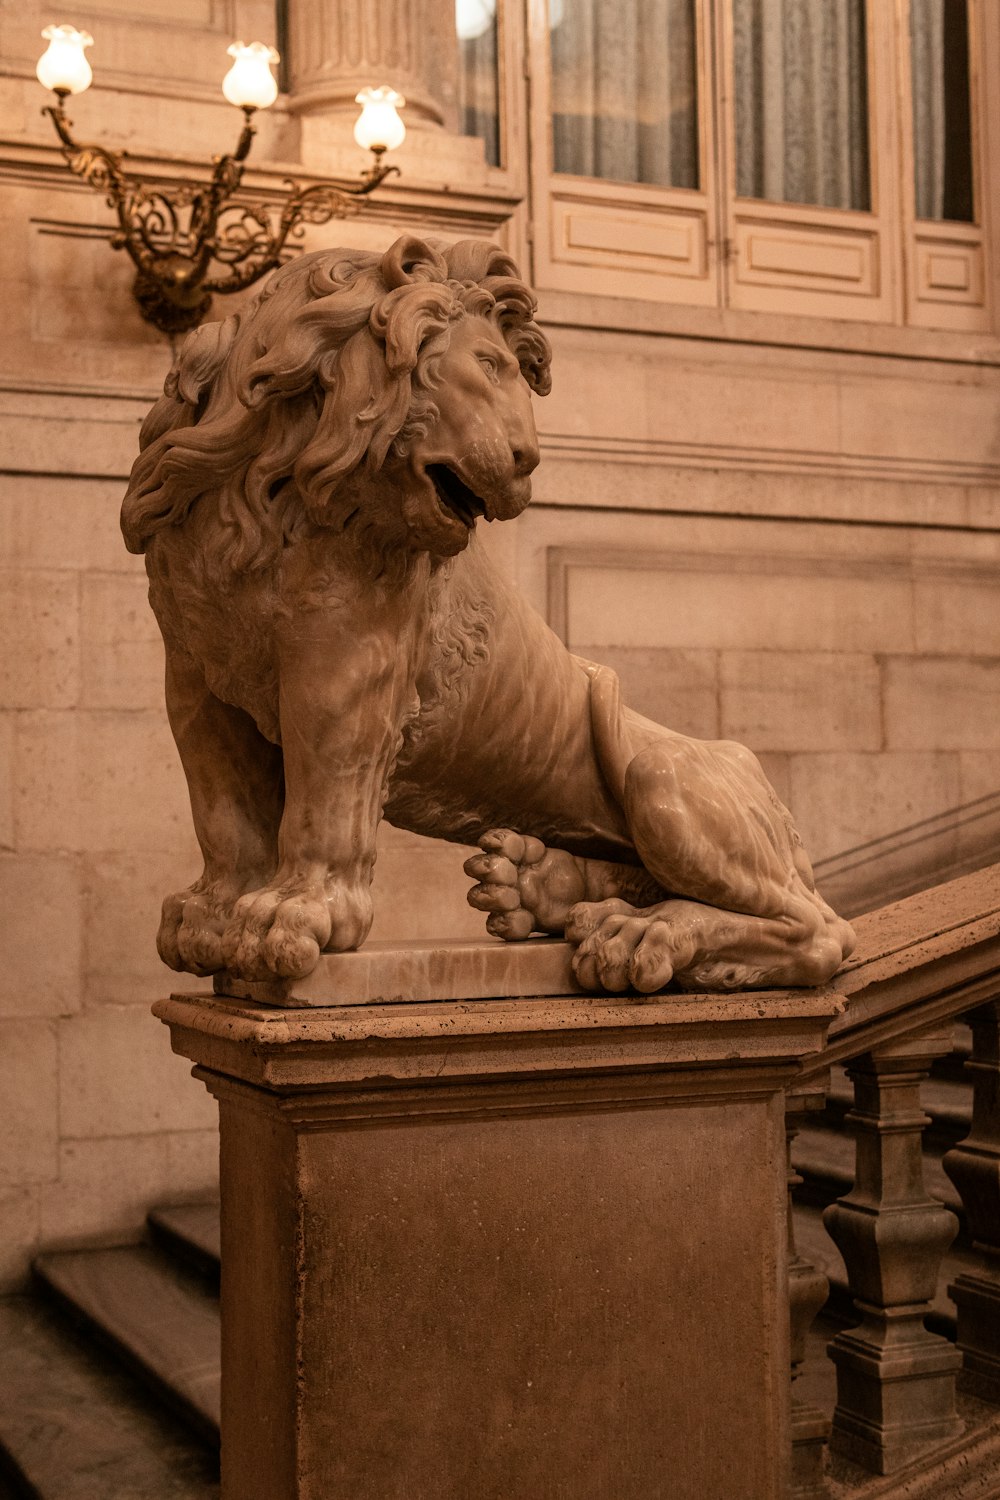 a statue of a lion sitting on top of a wooden bench